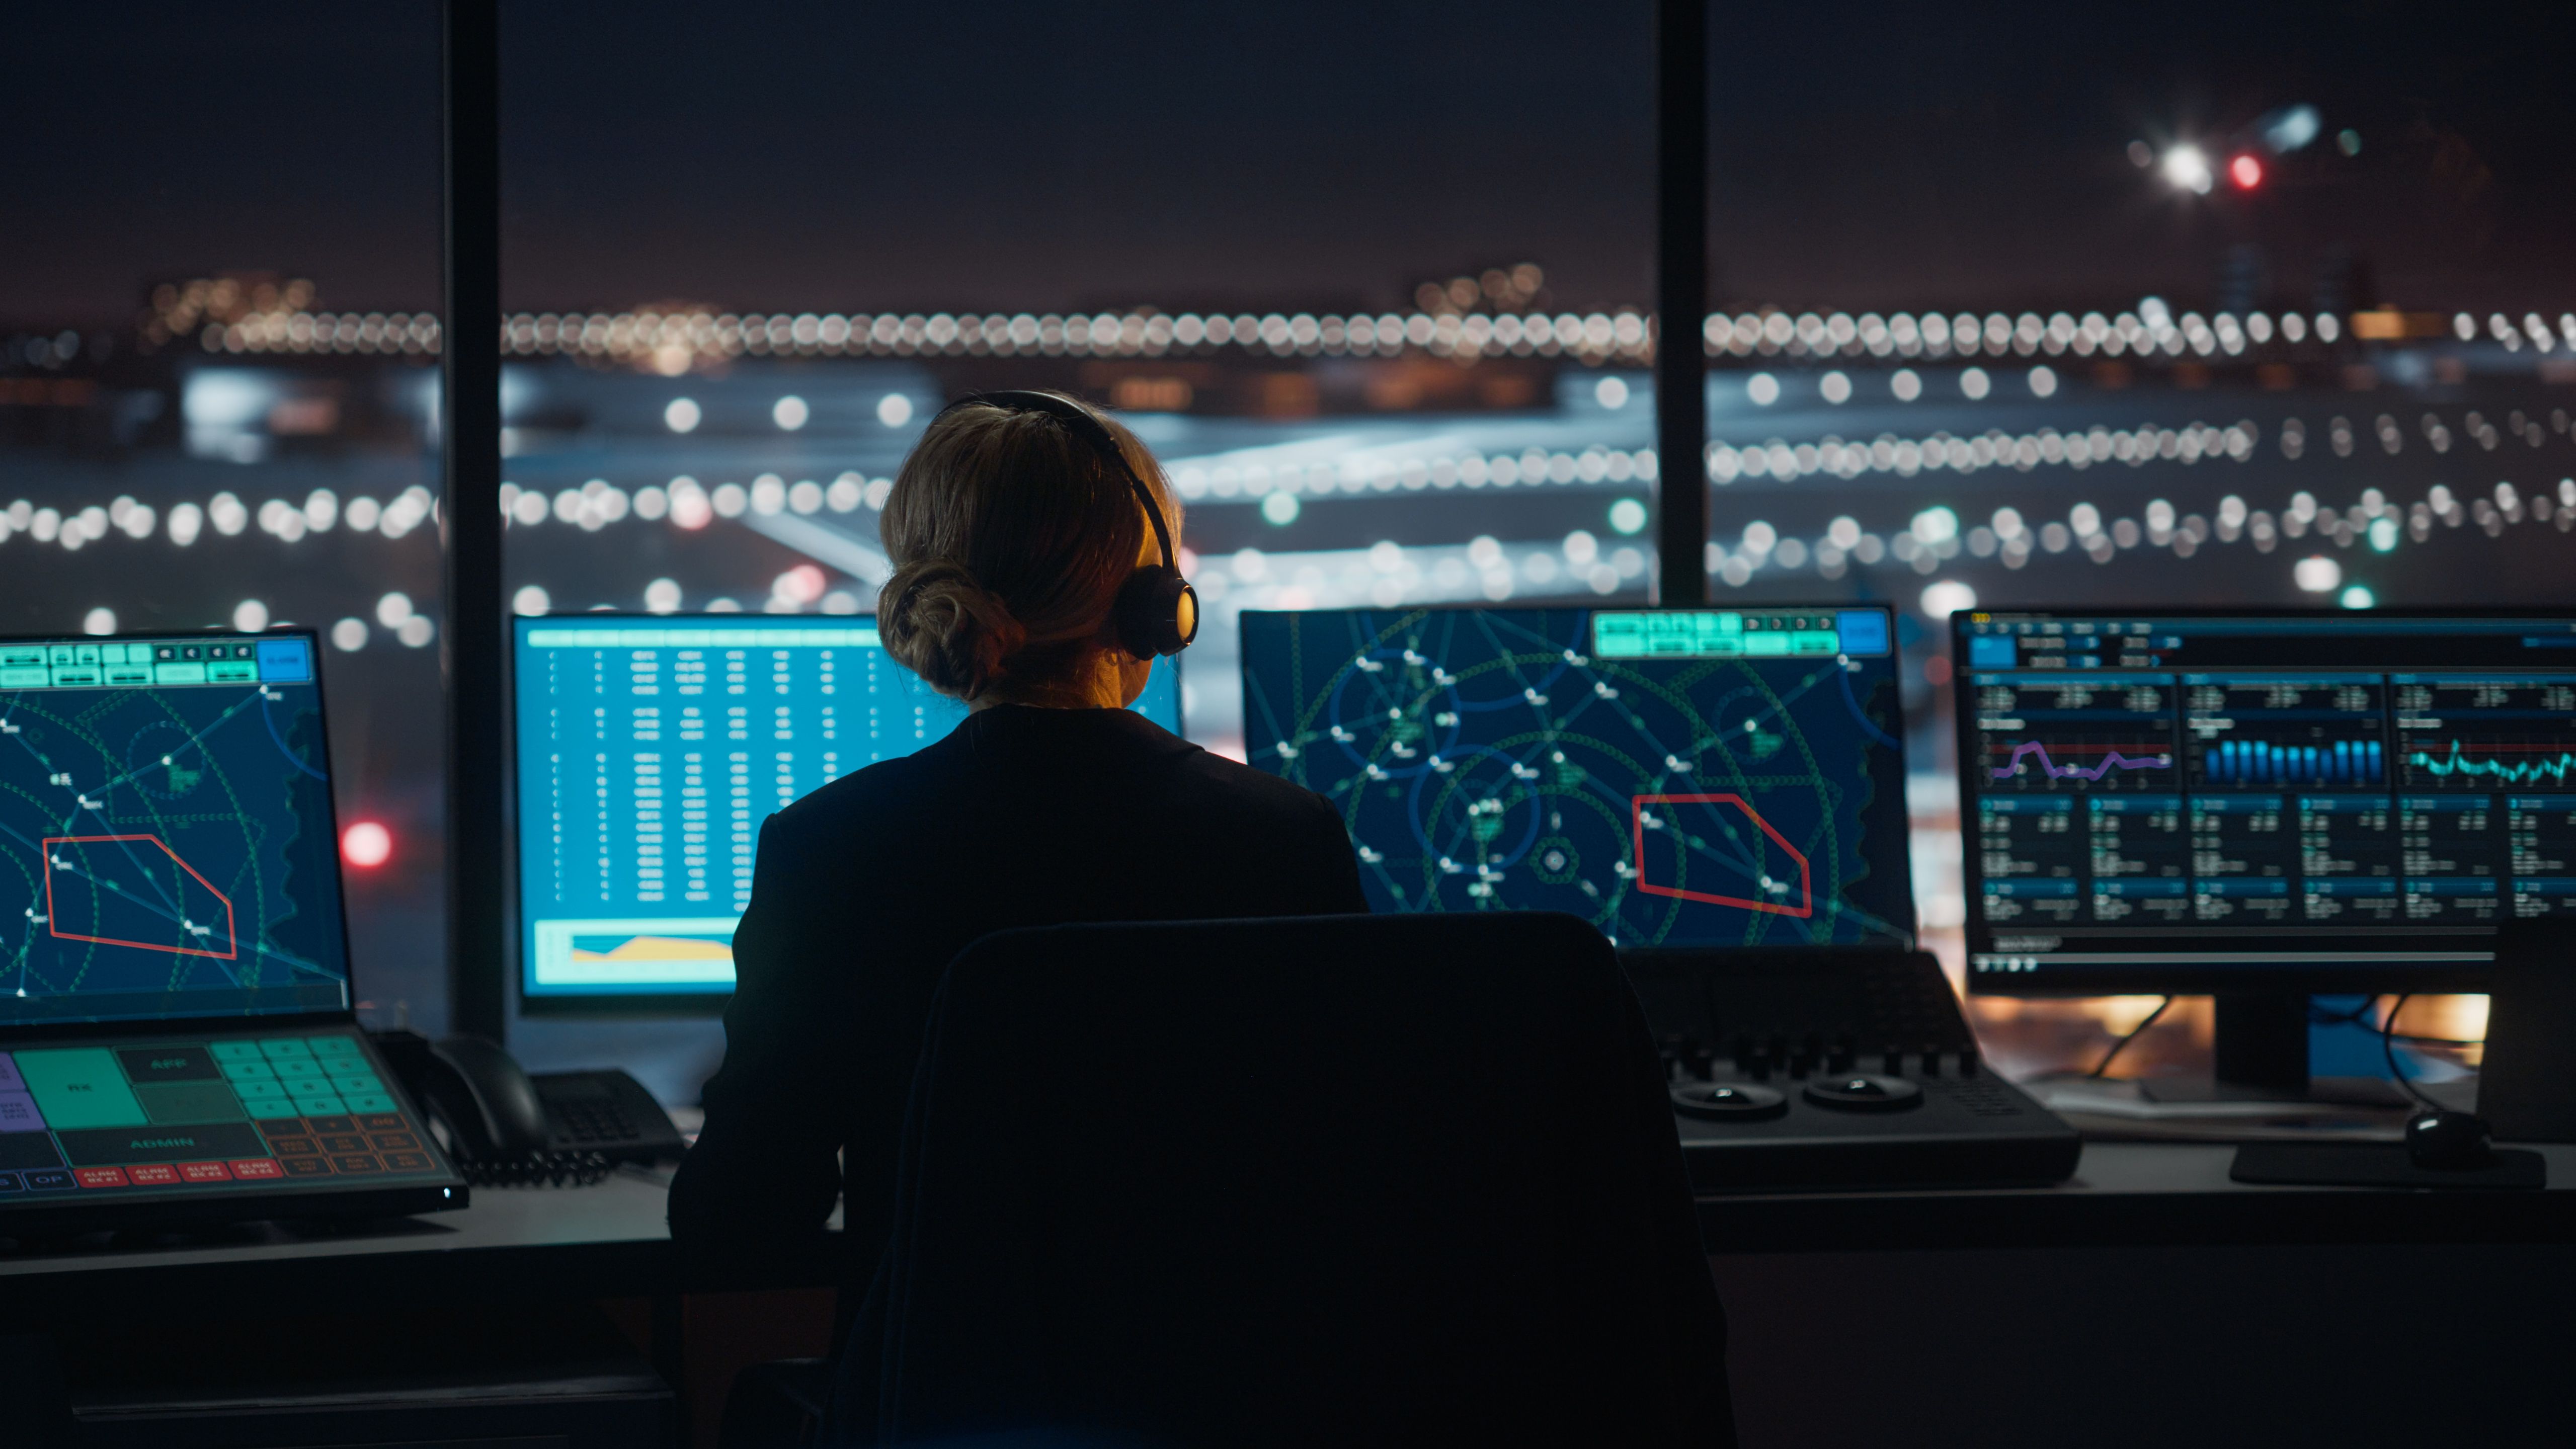 An Air traffic controller working in the tower.